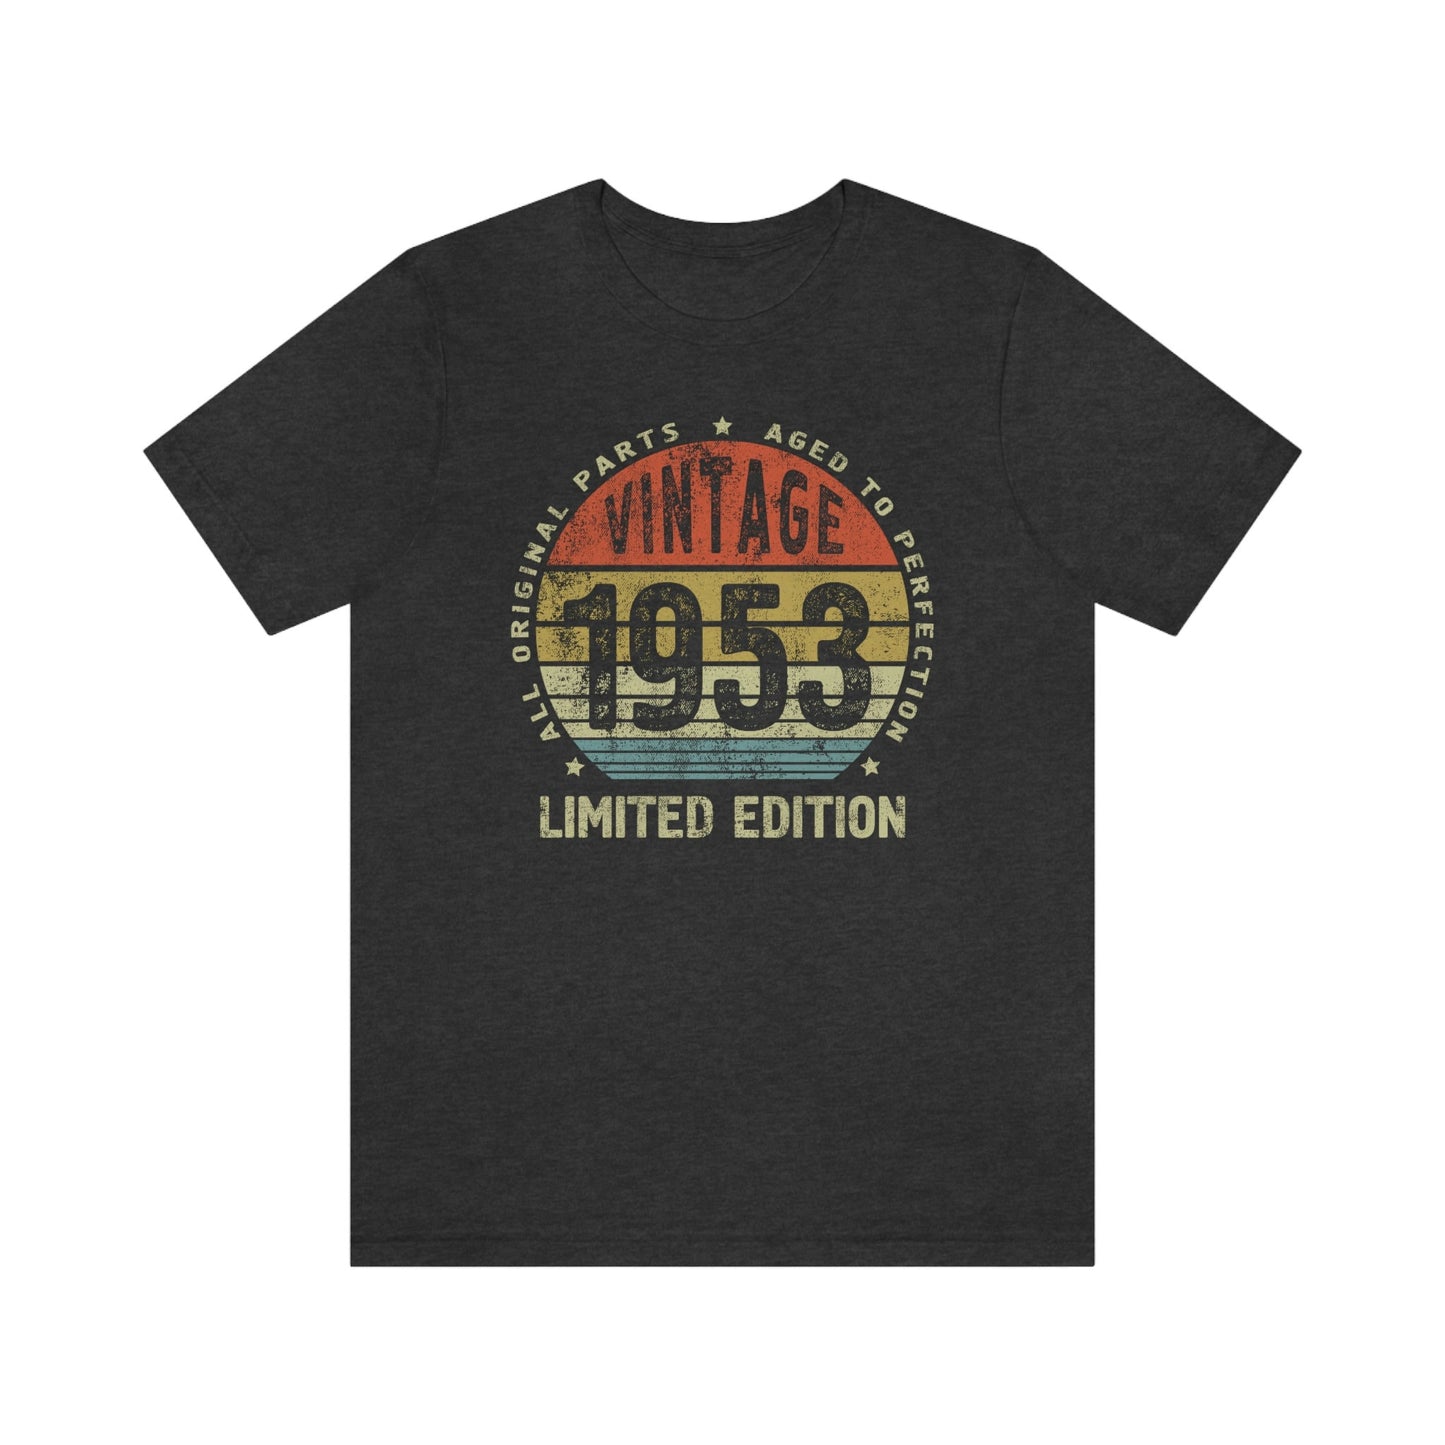 Vintage 1953 Birthday Shirt for Women or Men, Gift t-shirt for Wife or Husband